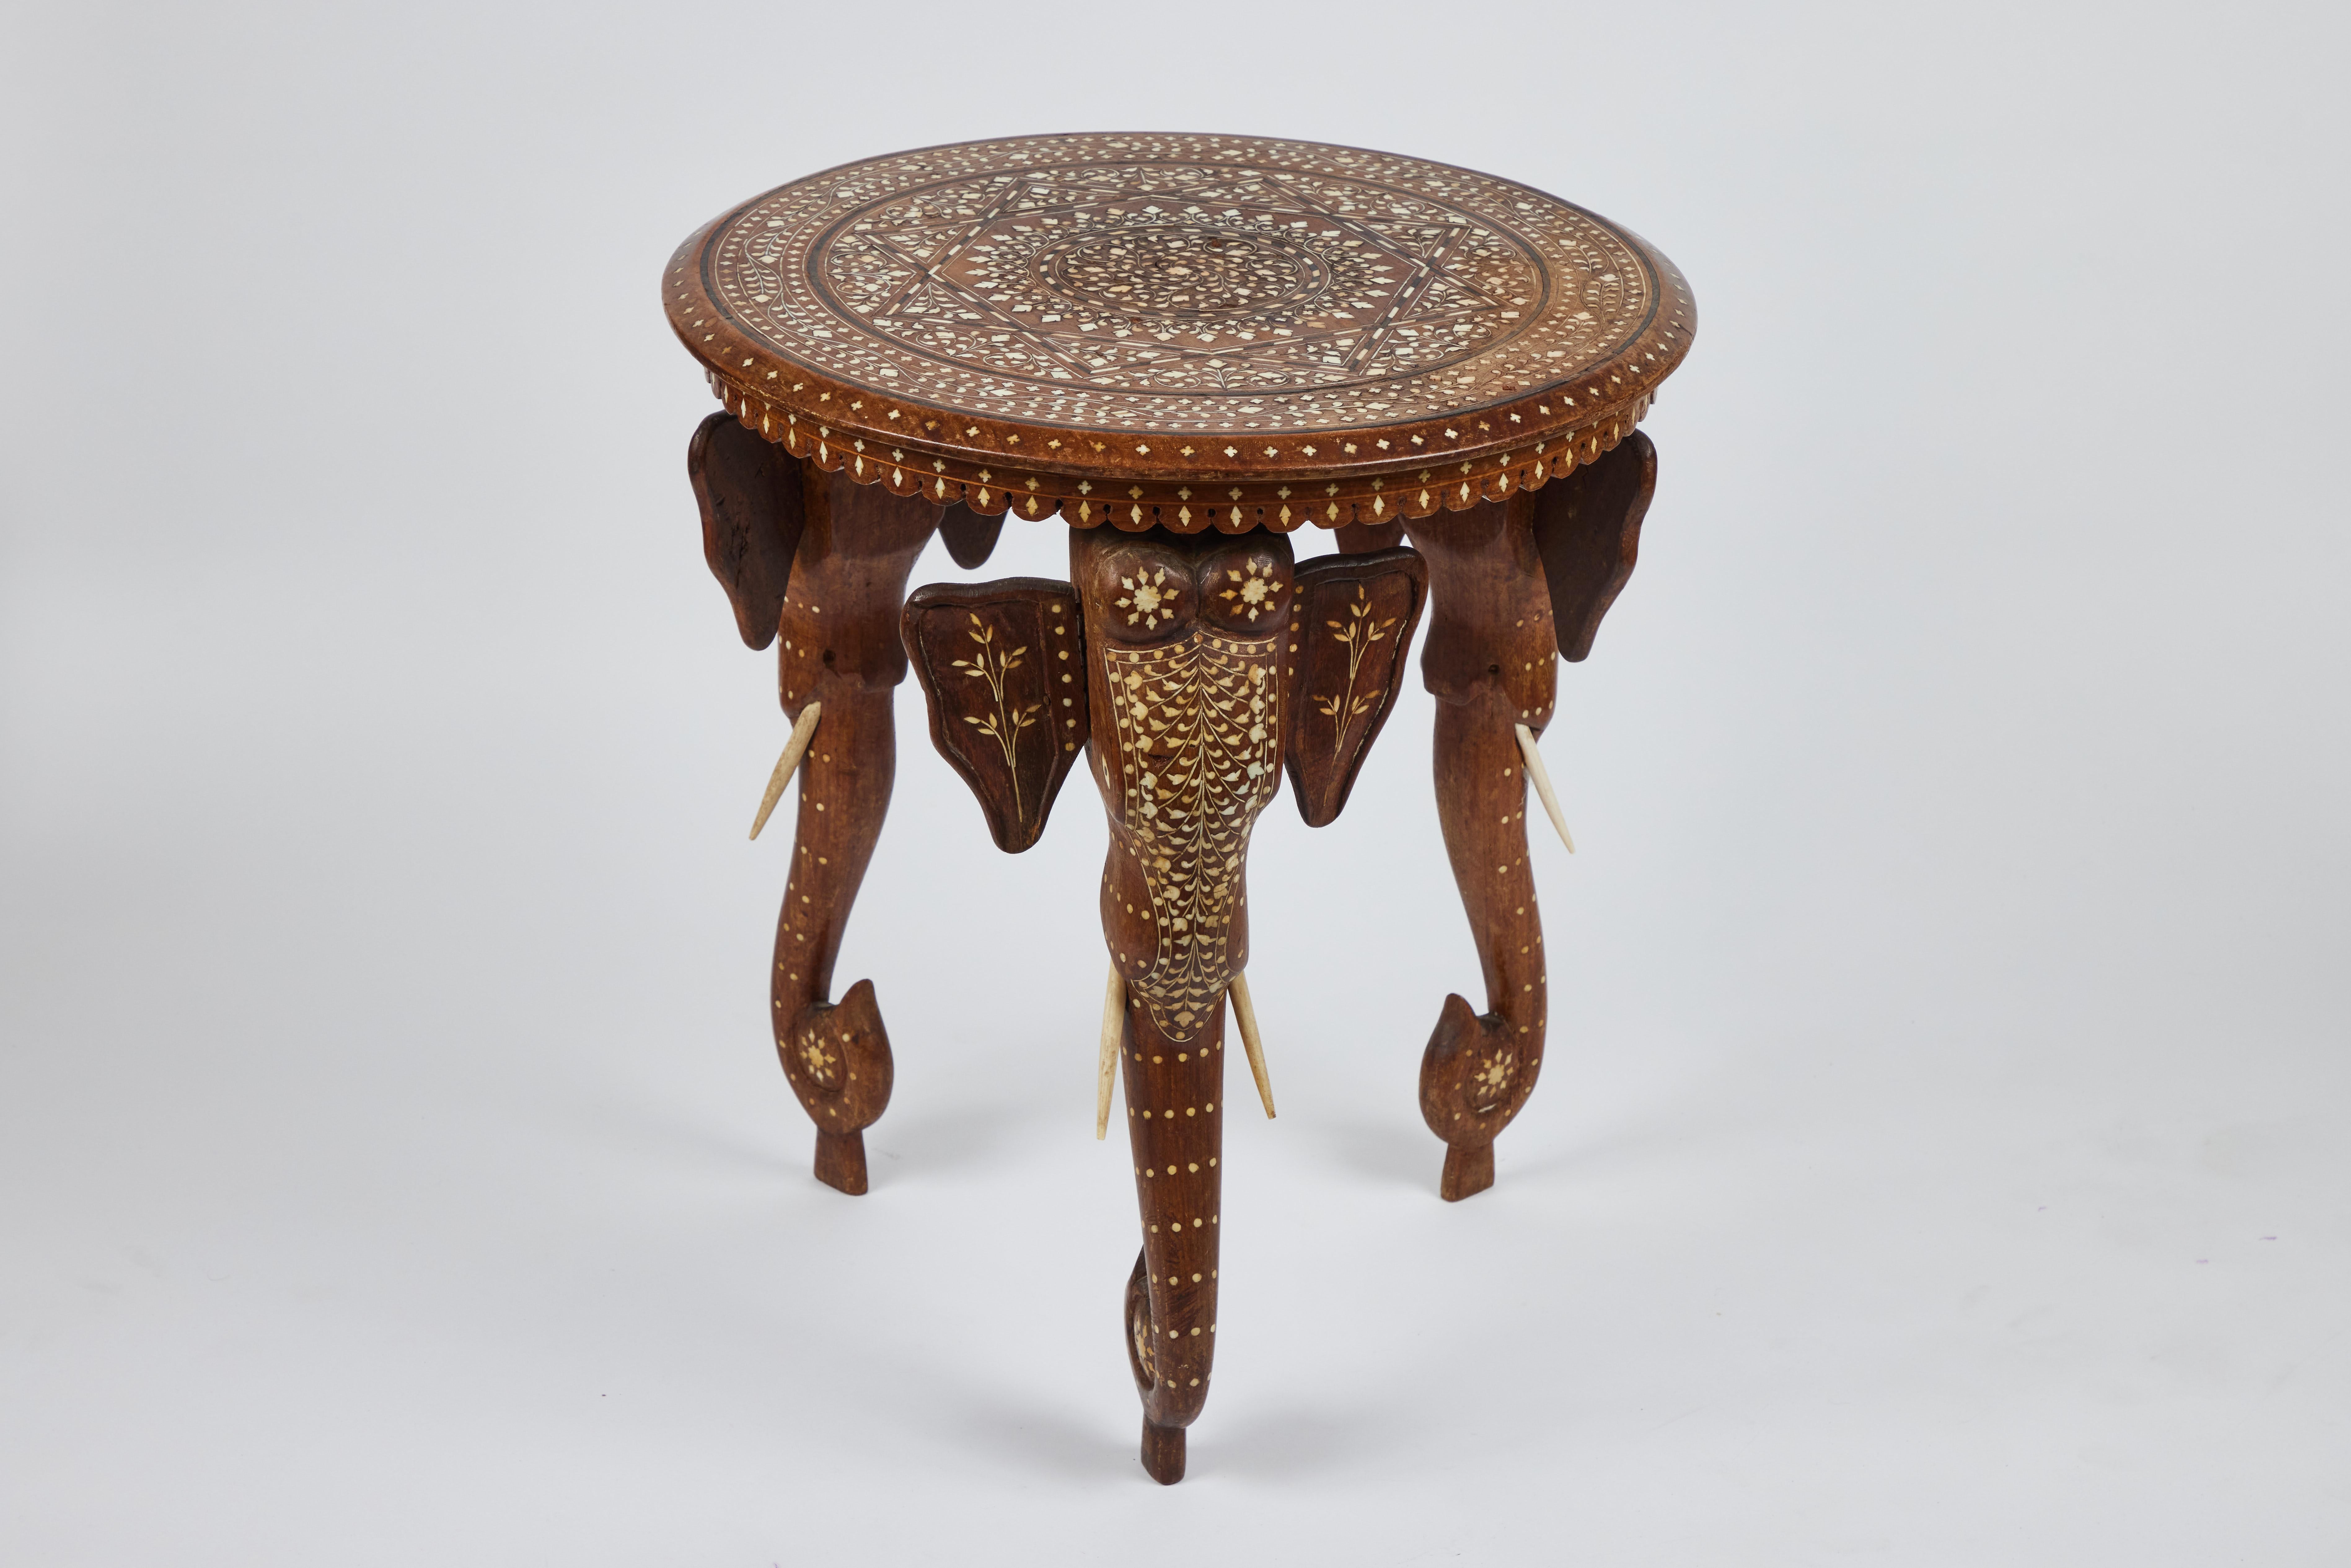 A detailed vintage hand carved wood side table with 'elephant head legs' and intricately inlaid bone designs all over the top and legs. It is made in British India.

Measures: 18